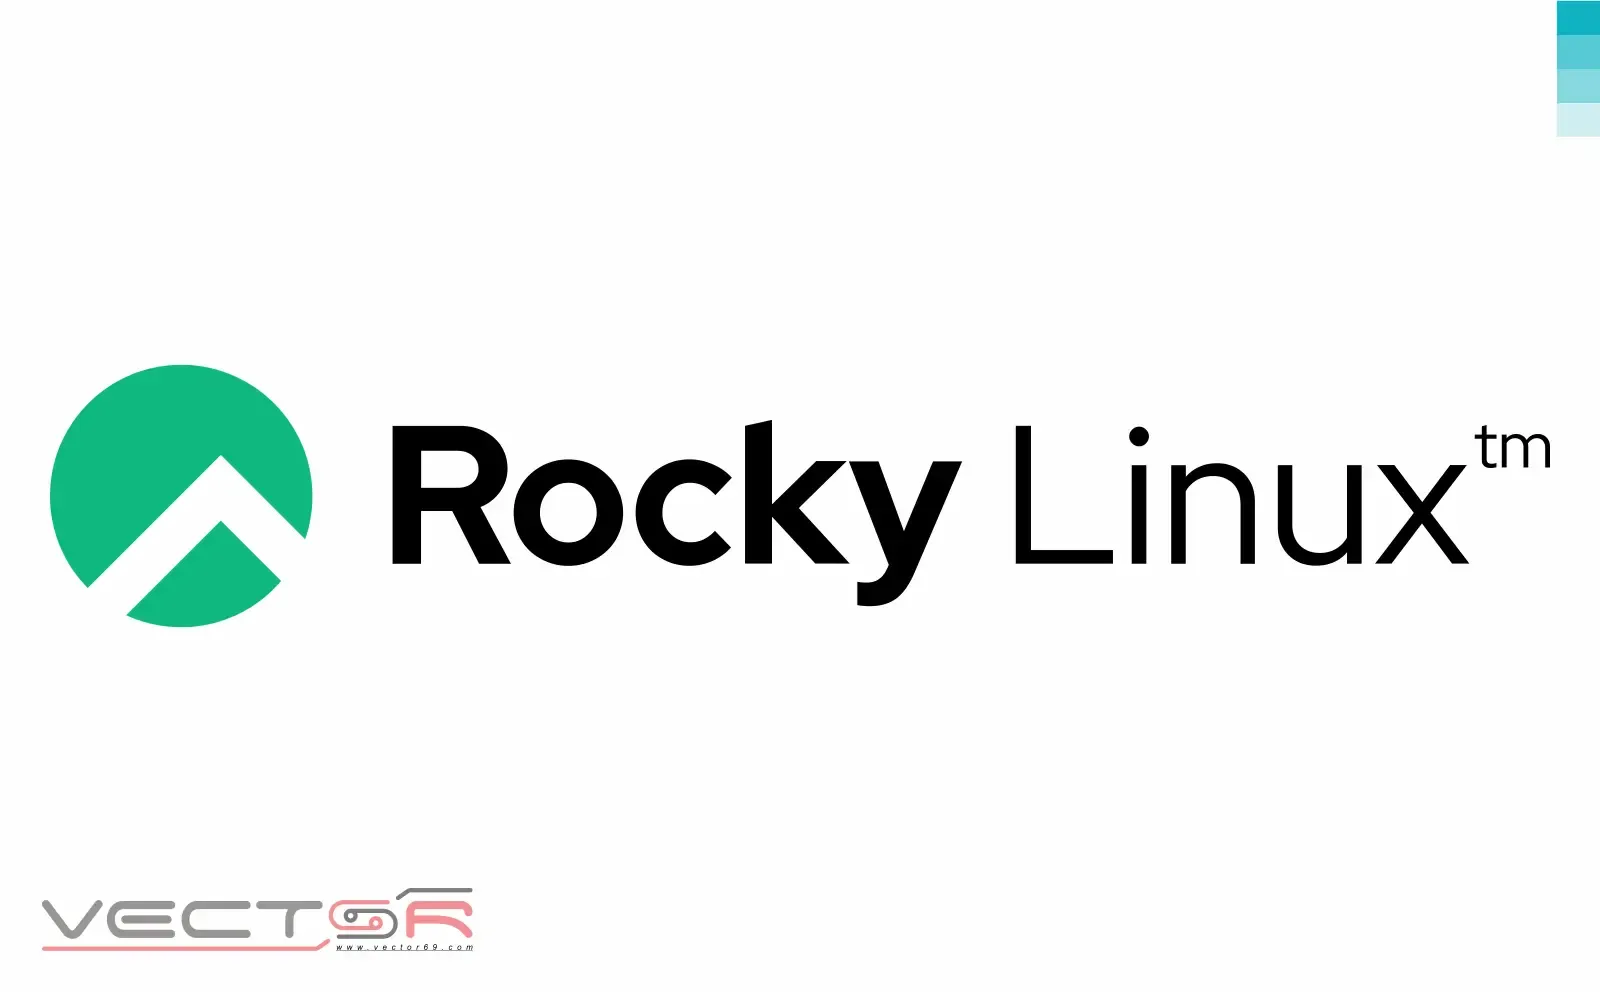 Rocky Linux Logo - Download Vector File SVG (Scalable Vector Graphics)